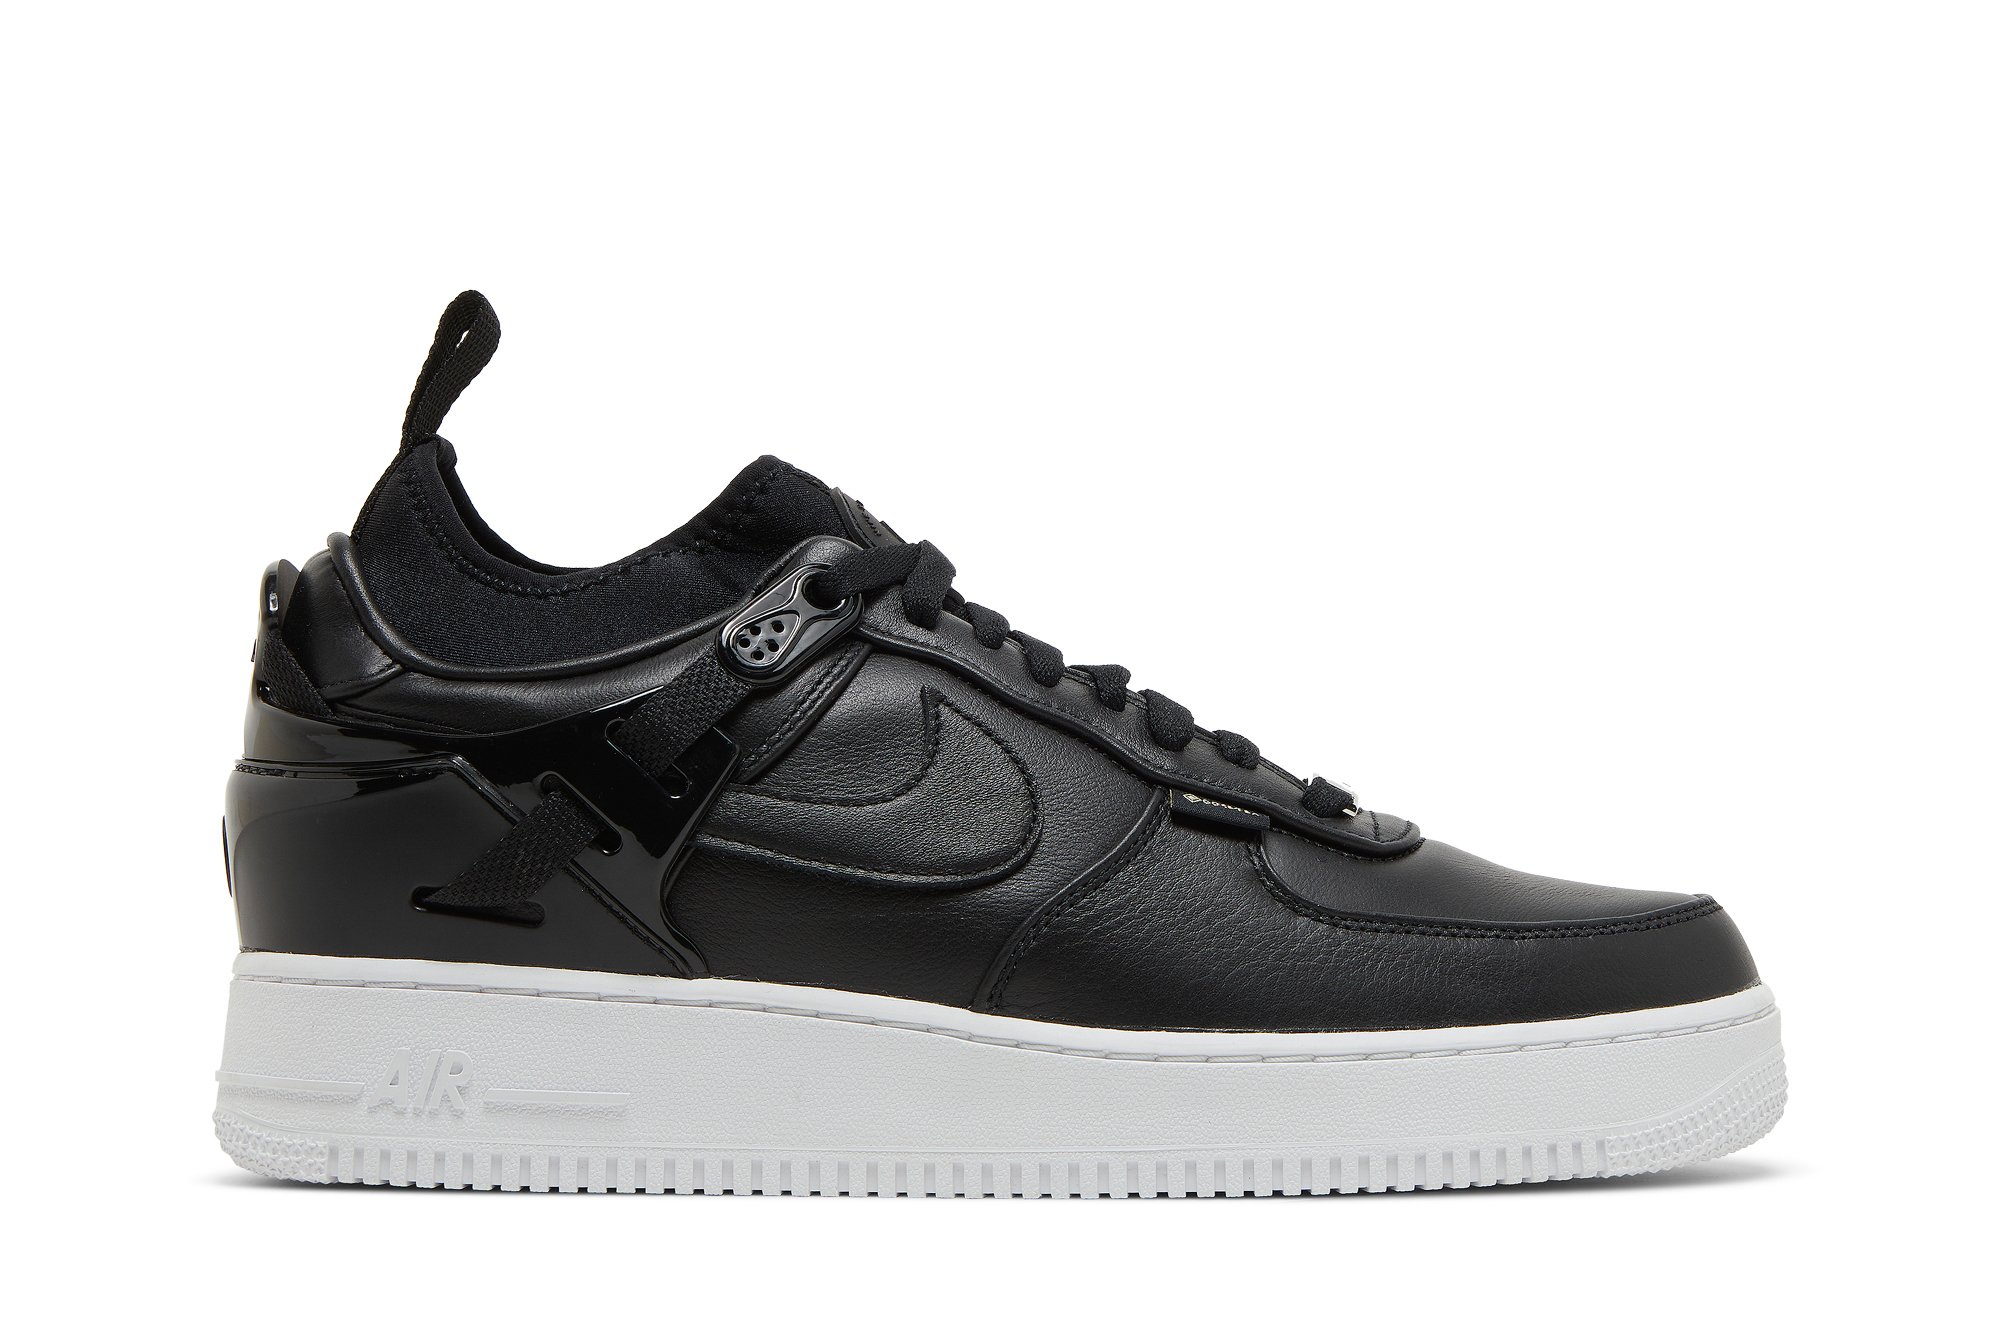 Buy Undercover x Air Force 1 Low SP GORE-TEX 'Black' - DQ7558 002